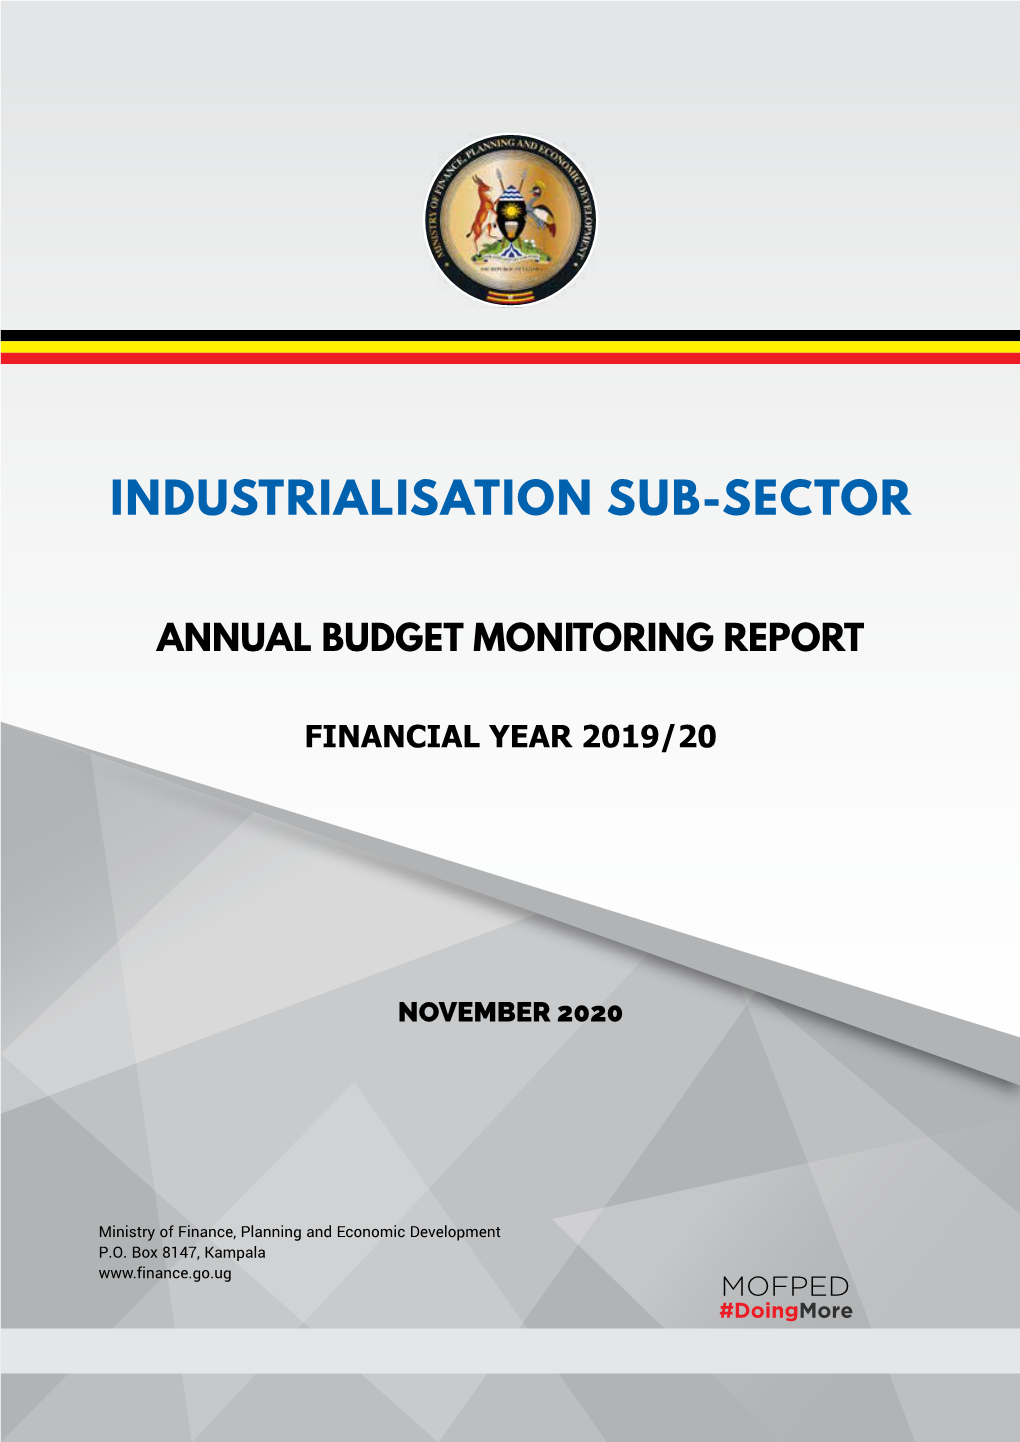 Industrialisation Sub-Sector Annual Budget Monitoring Report FY2019/20